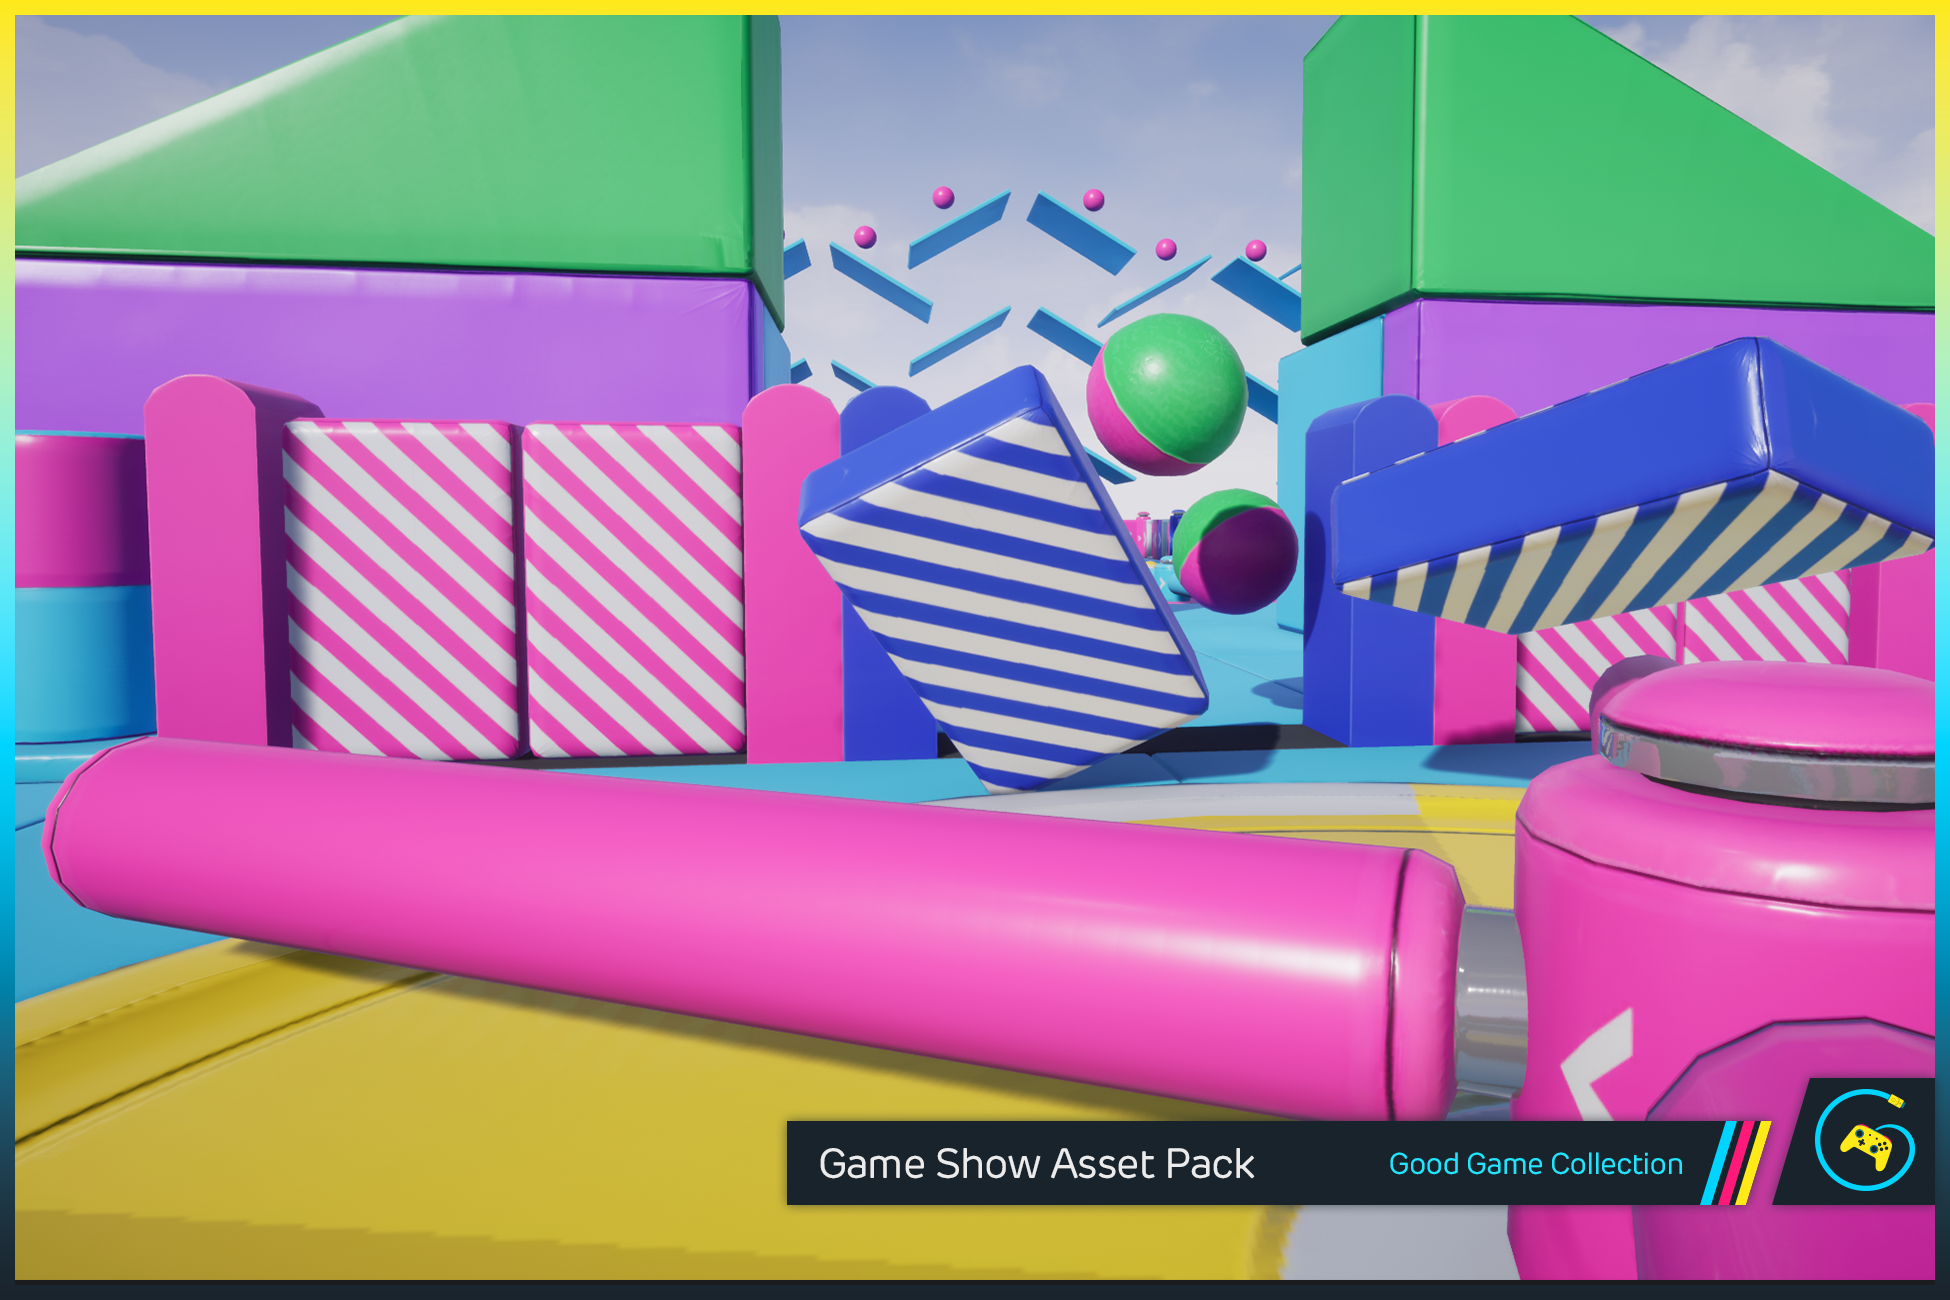 Game Show Asset Pack